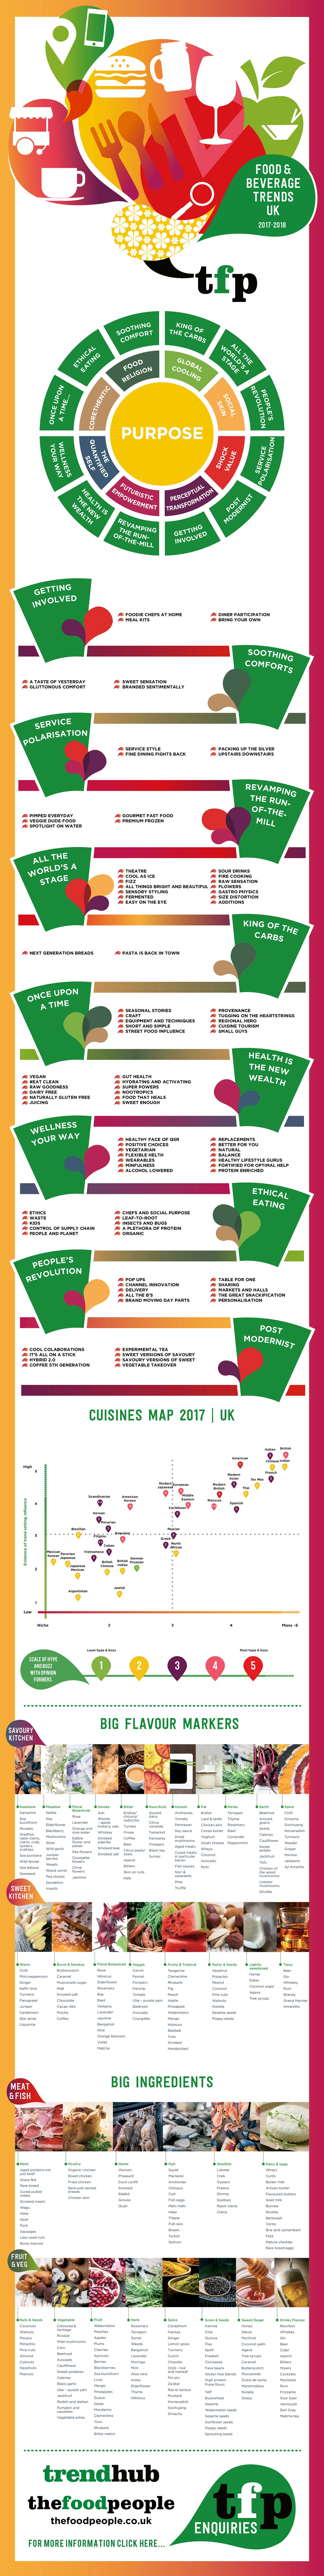 Infographic of Food and Beverage Trends 2017 - UK